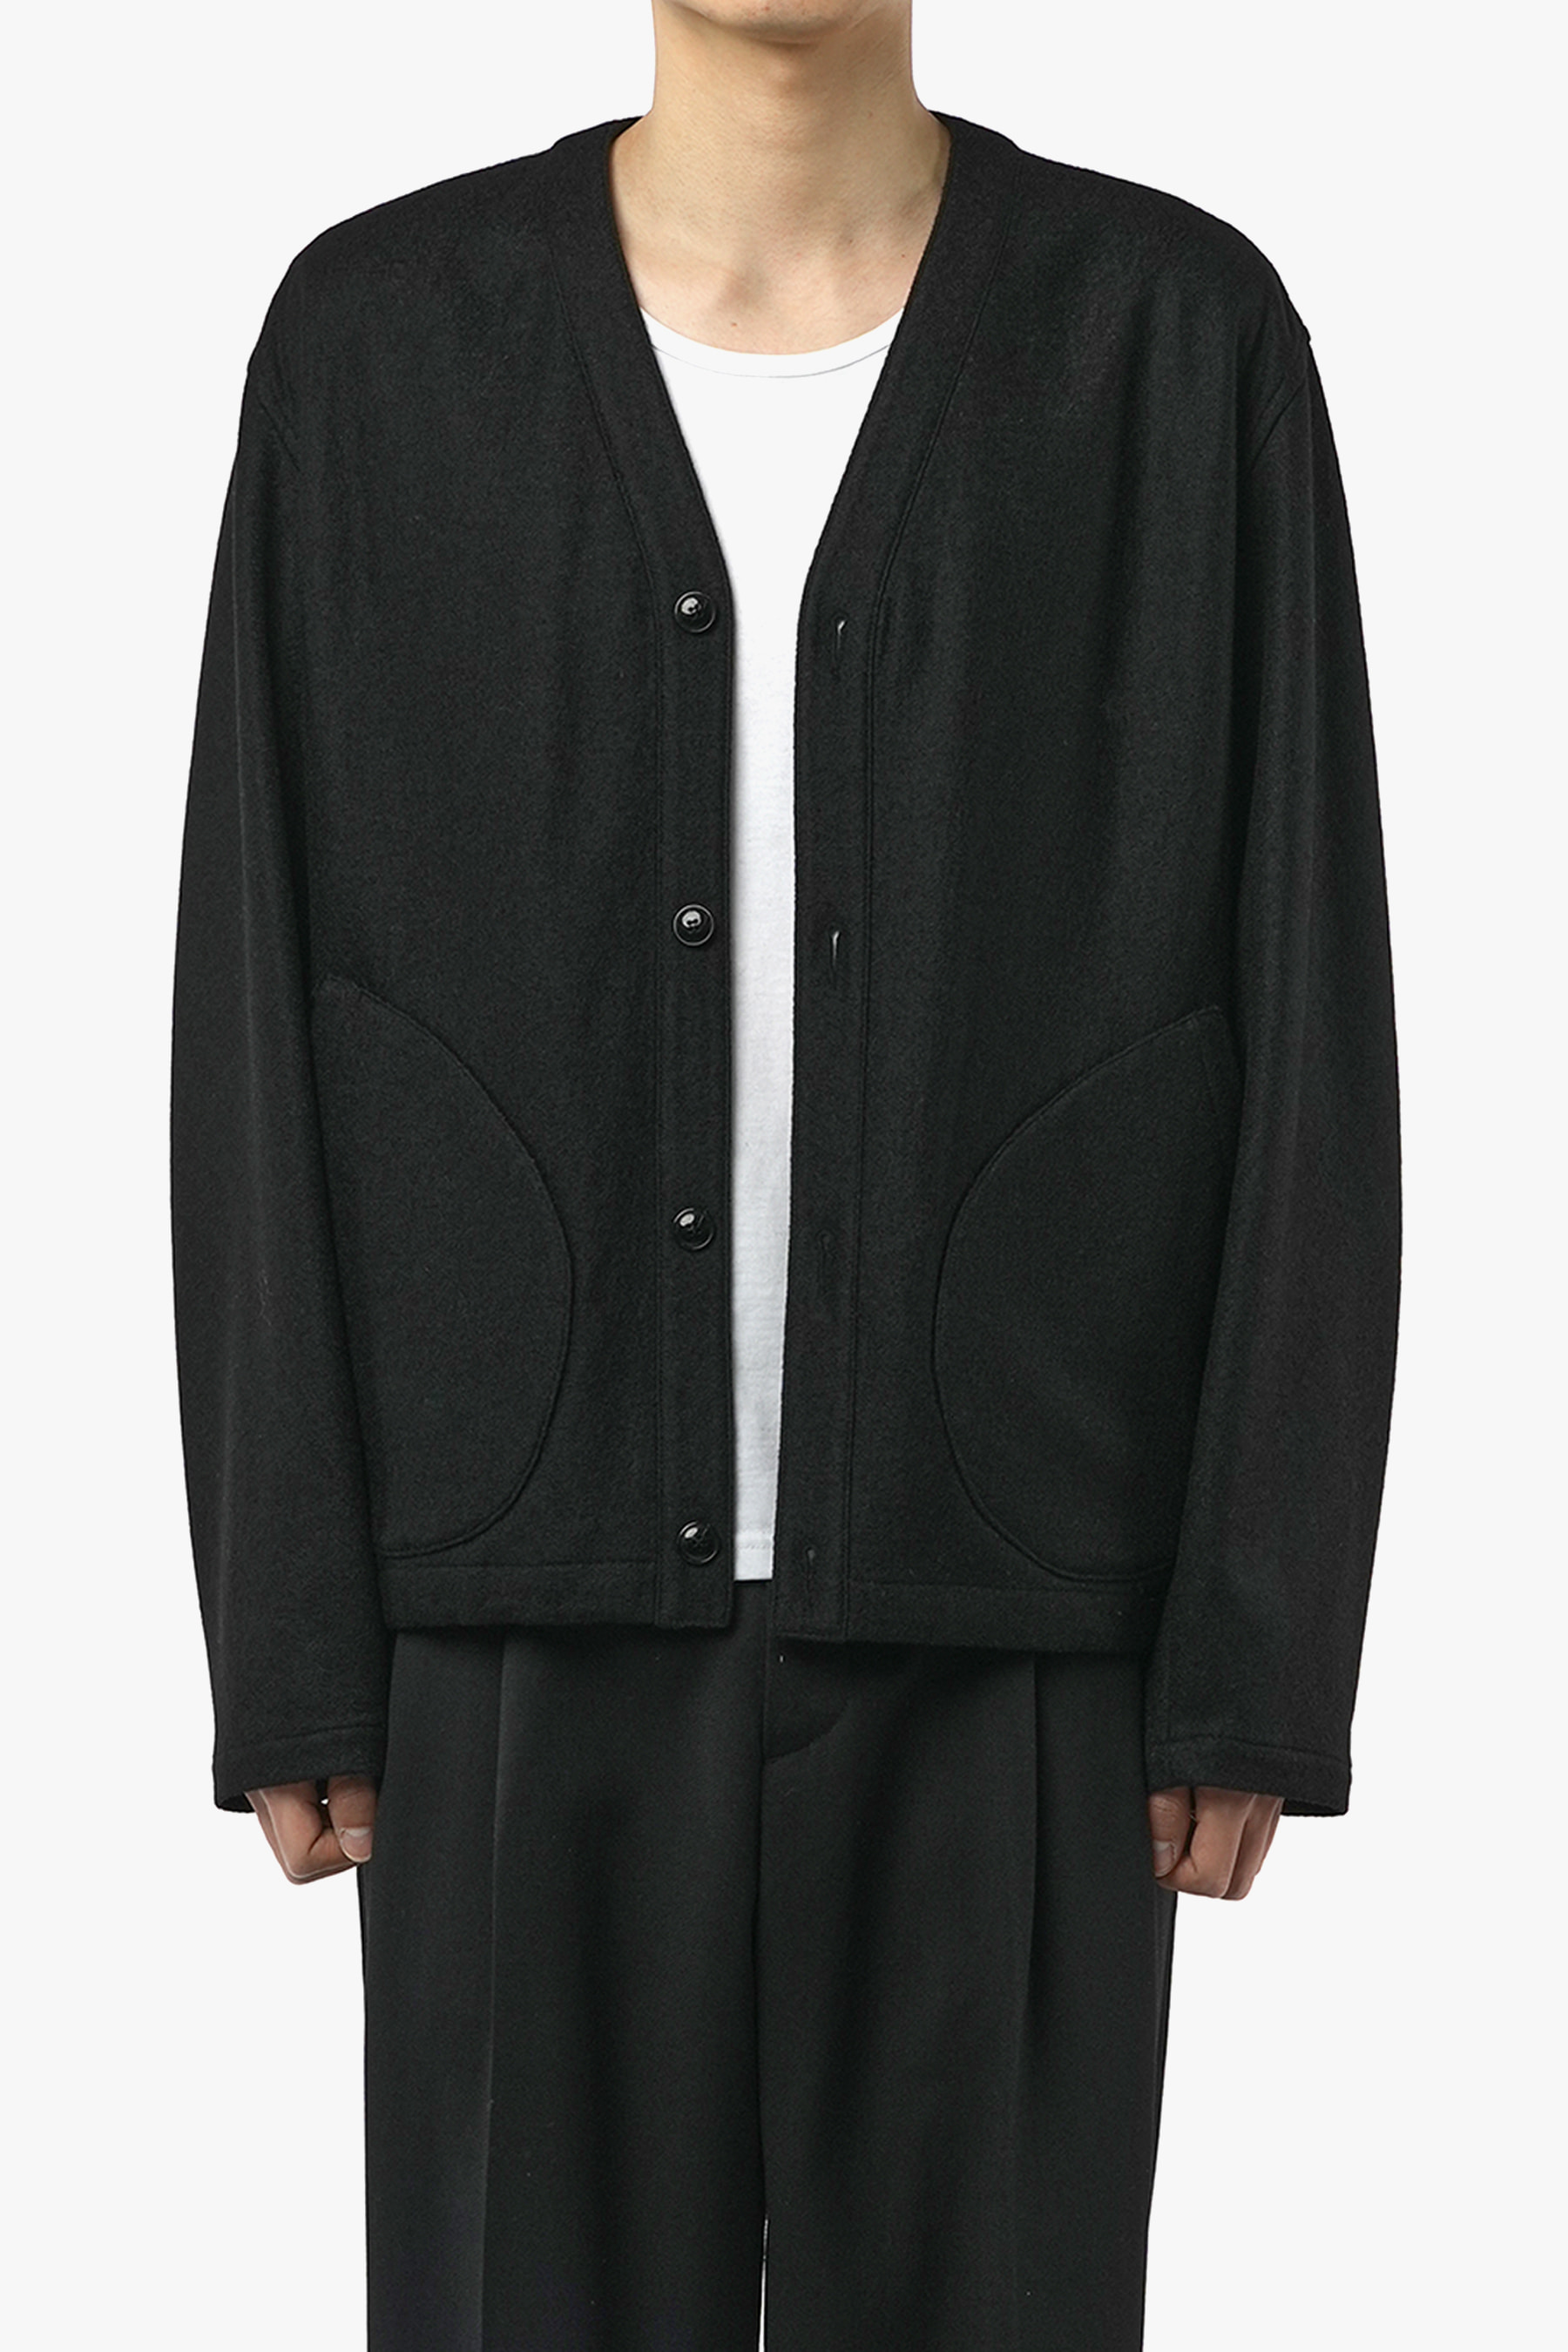 BLACK STRUCTURED MILLED WOOL CARDIGAN